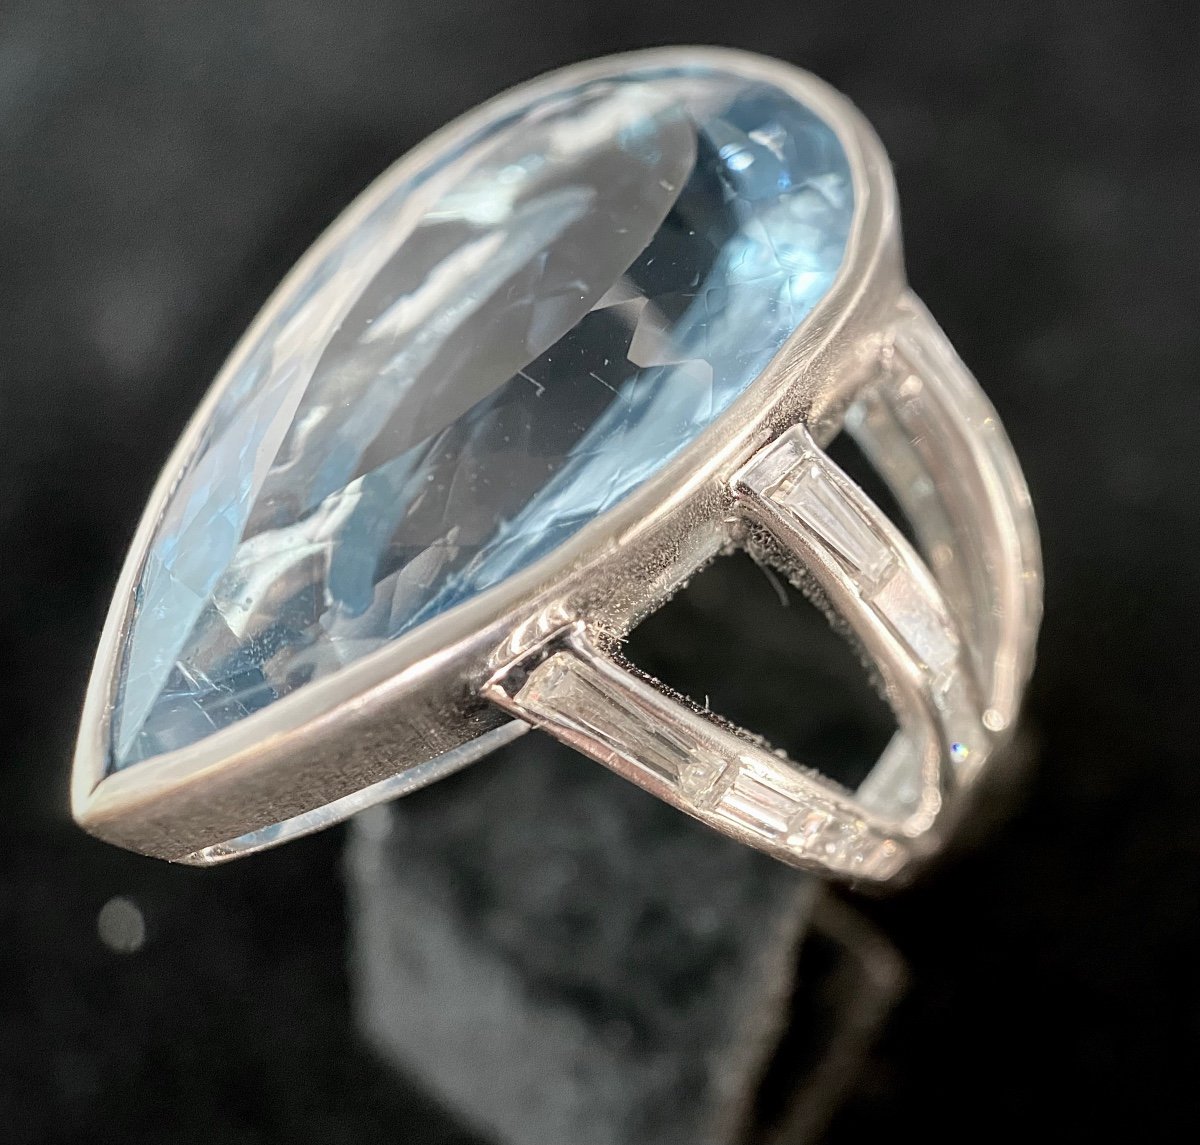 White Gold Ring Set With An Aquamarine Of Approximately 30 Carats Surrounded By 1.50 Carats Of Diamond